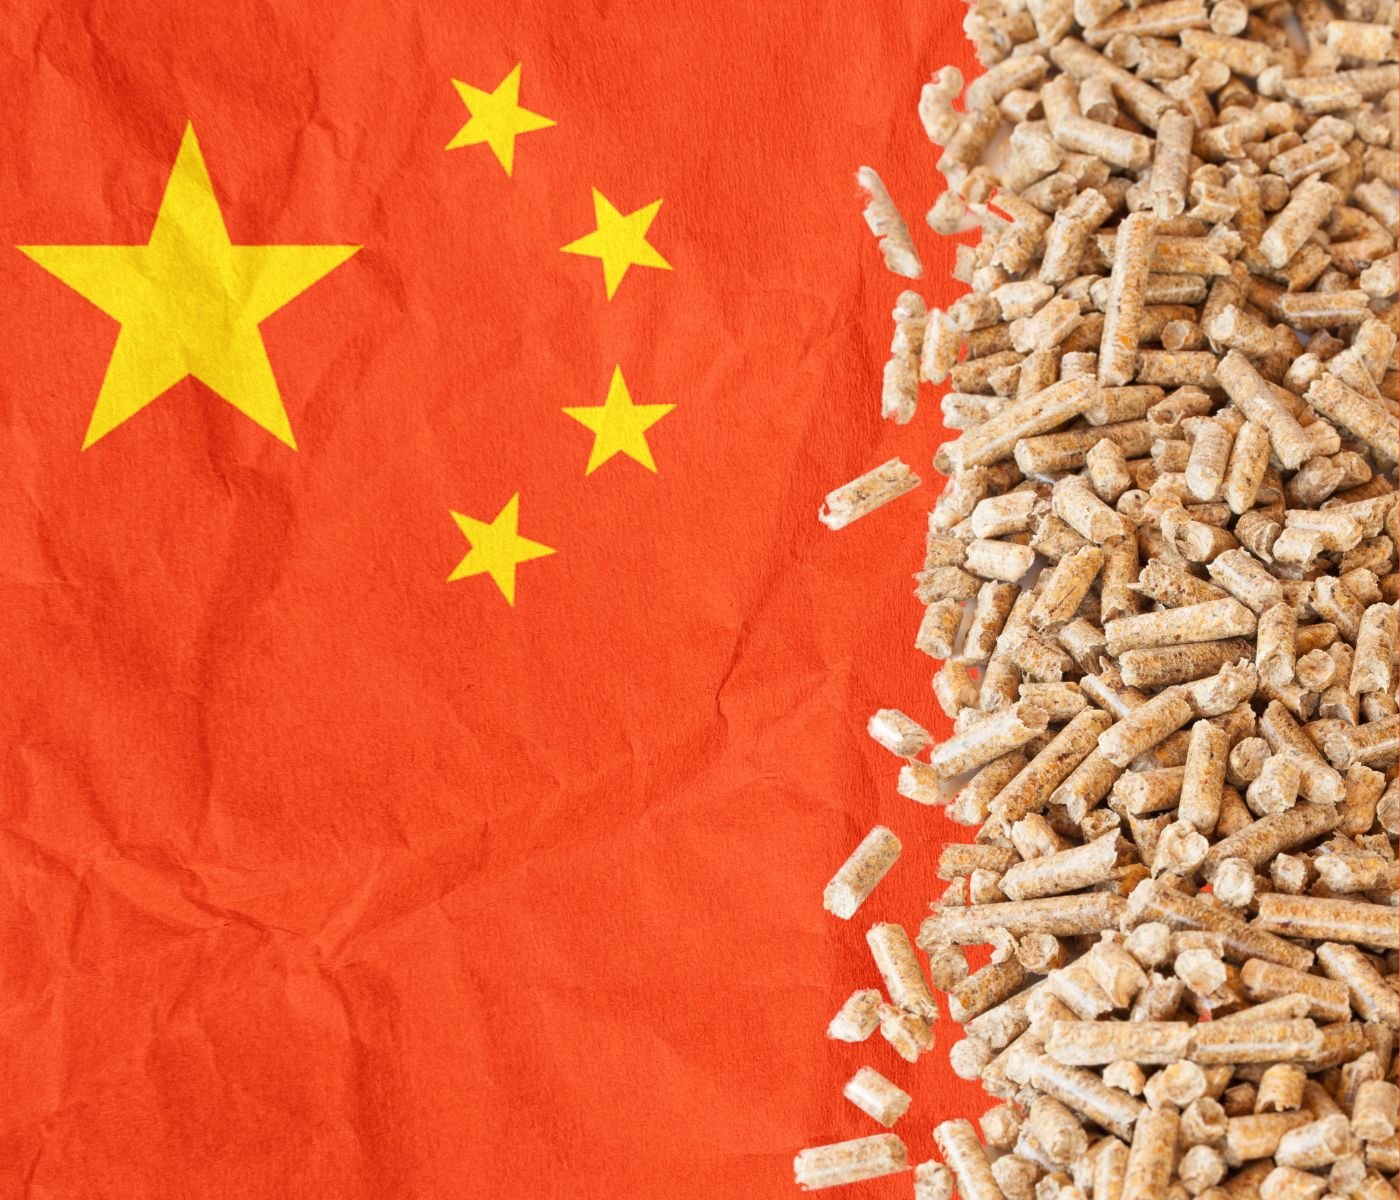 Food security concerns prompt China to cut soybean meal from animal feed